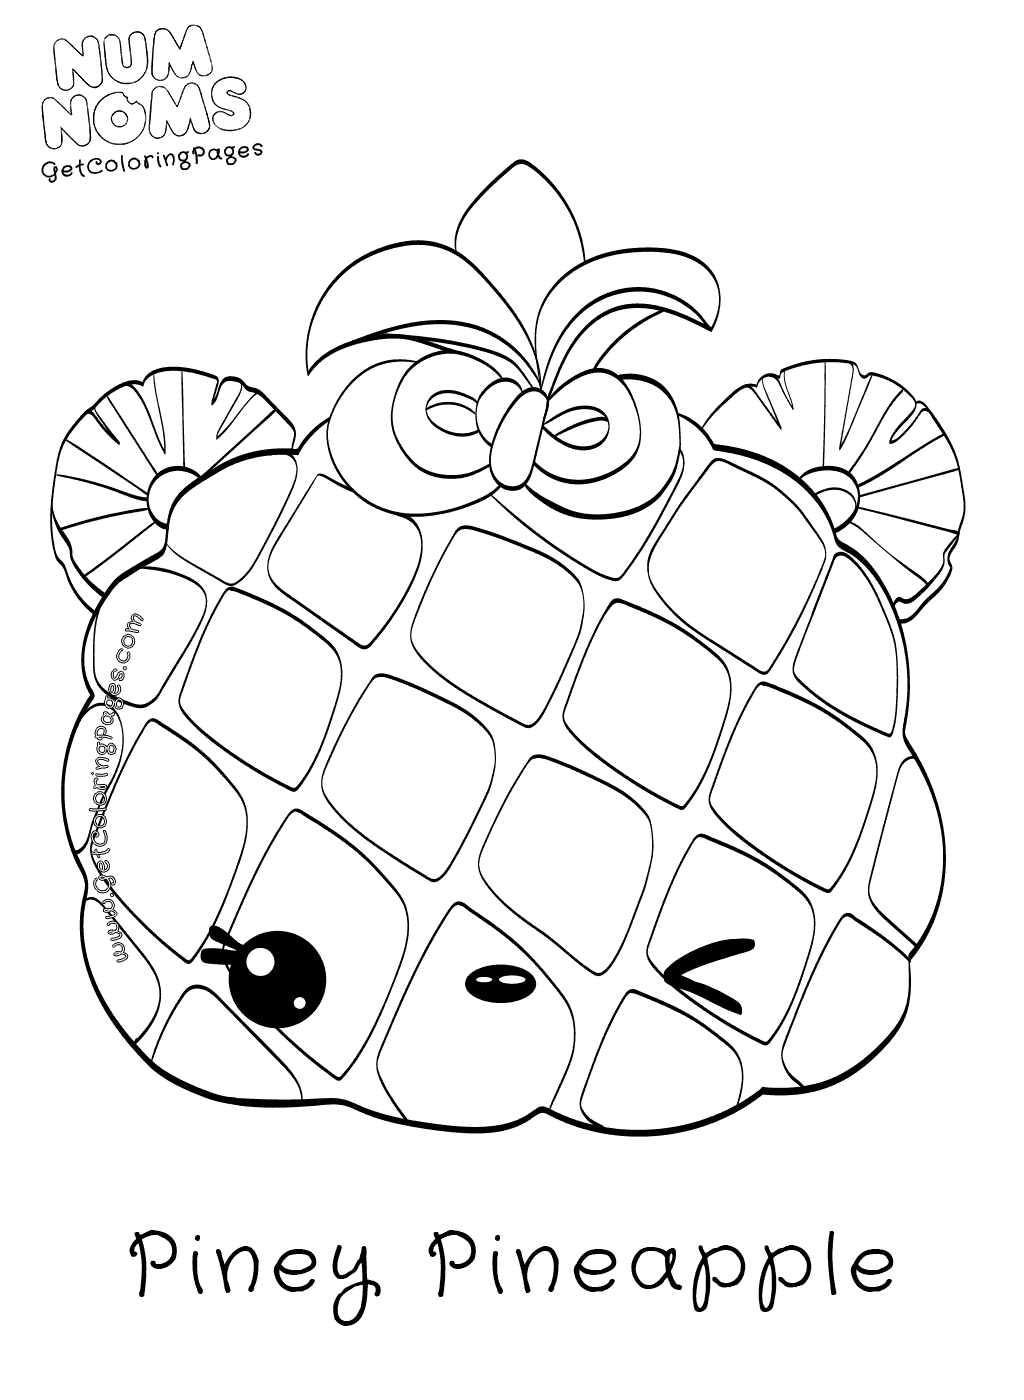 Rainbow Corn Colouring Pages Cartoon / Rainbow Coloring Page - Twisty